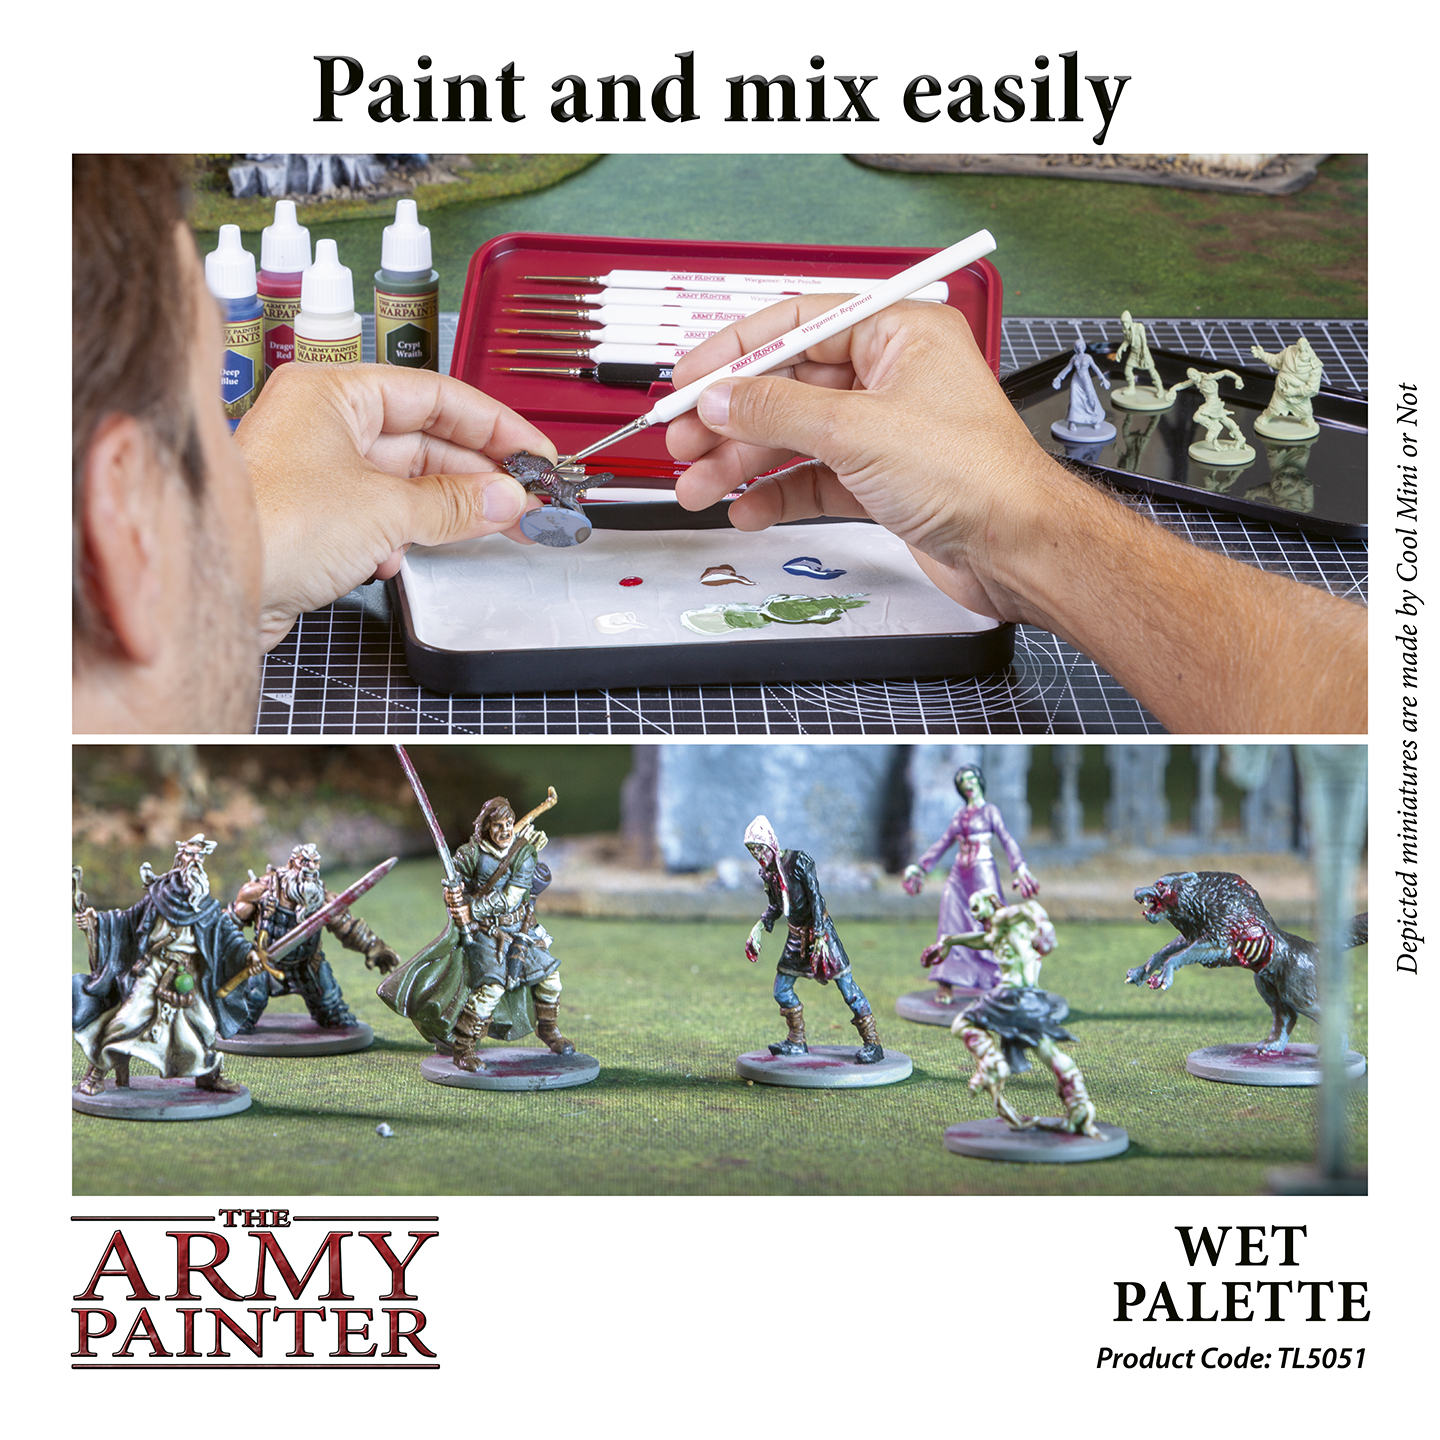 The Army Painter Wet Palette and Hydro Pack Bundle Premium Brush Storing Palette with 100 Palette Sheets and 4 Sponges for Tabletop Wargames Miniature Model Painting 